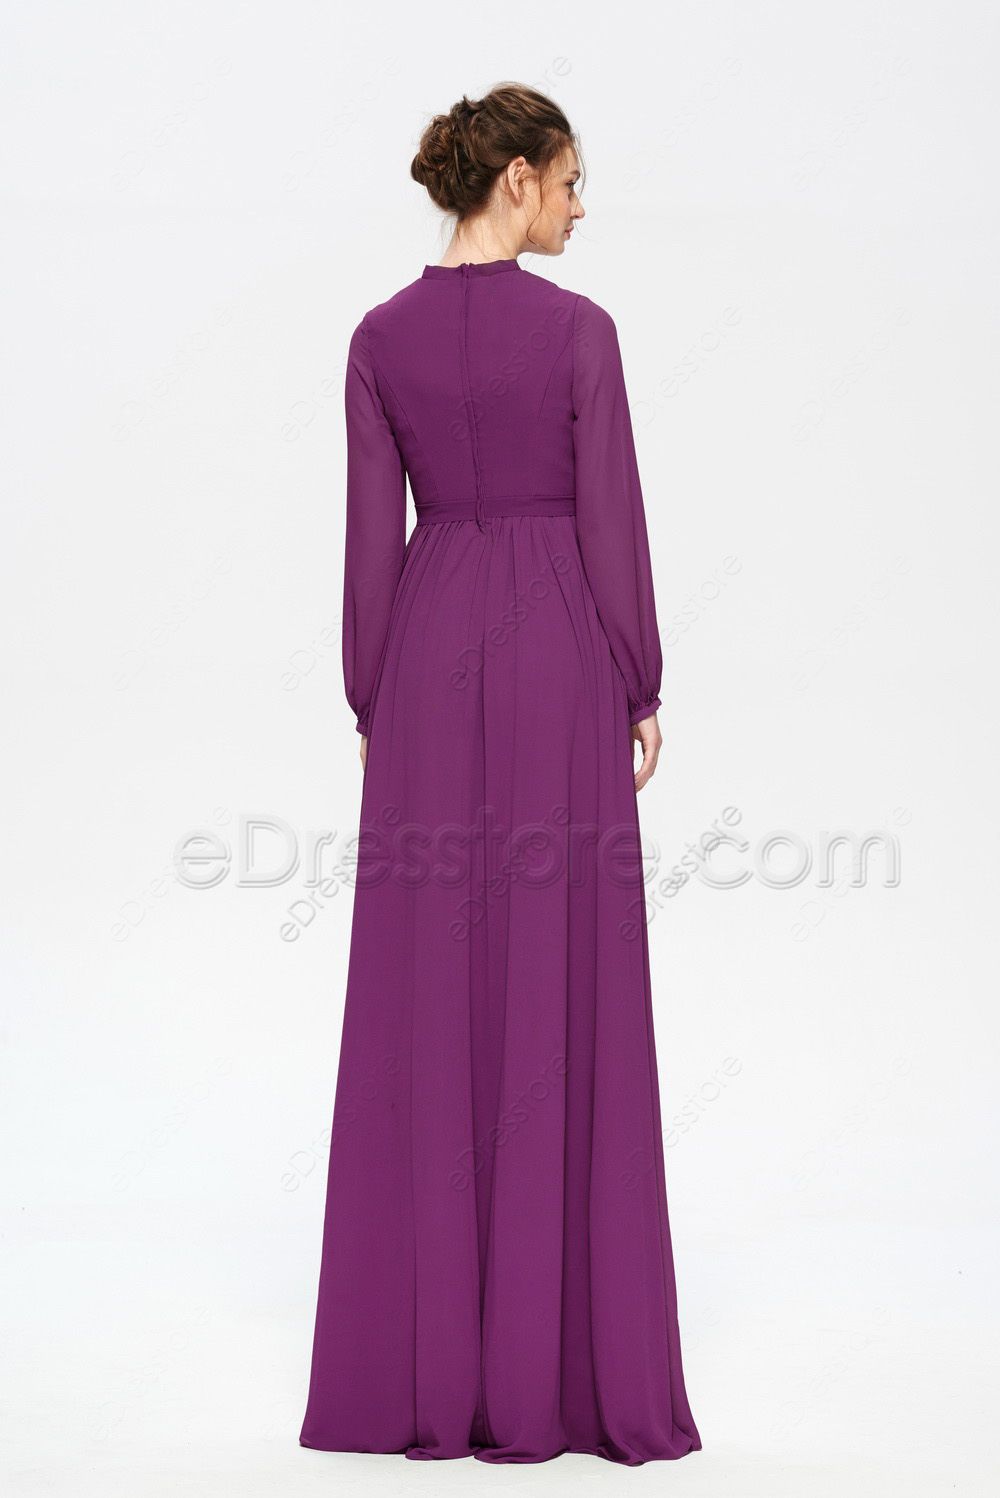 Berry Color Modest Mother of the Bride Dress Long Sleeves | eDresstore